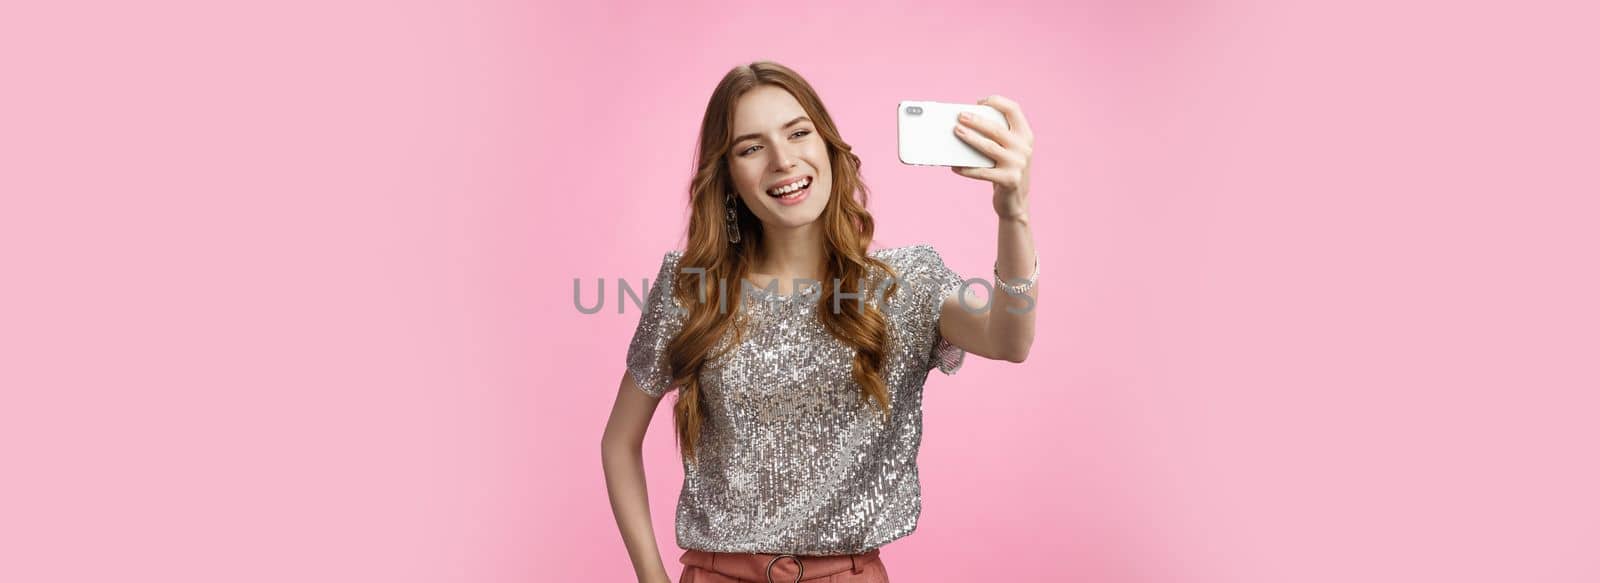 Sociable good-looking confident feminine caucasian woman recording video message taking selfie holding smartphone upper angle capturing image partying send photo online, posing pink background.